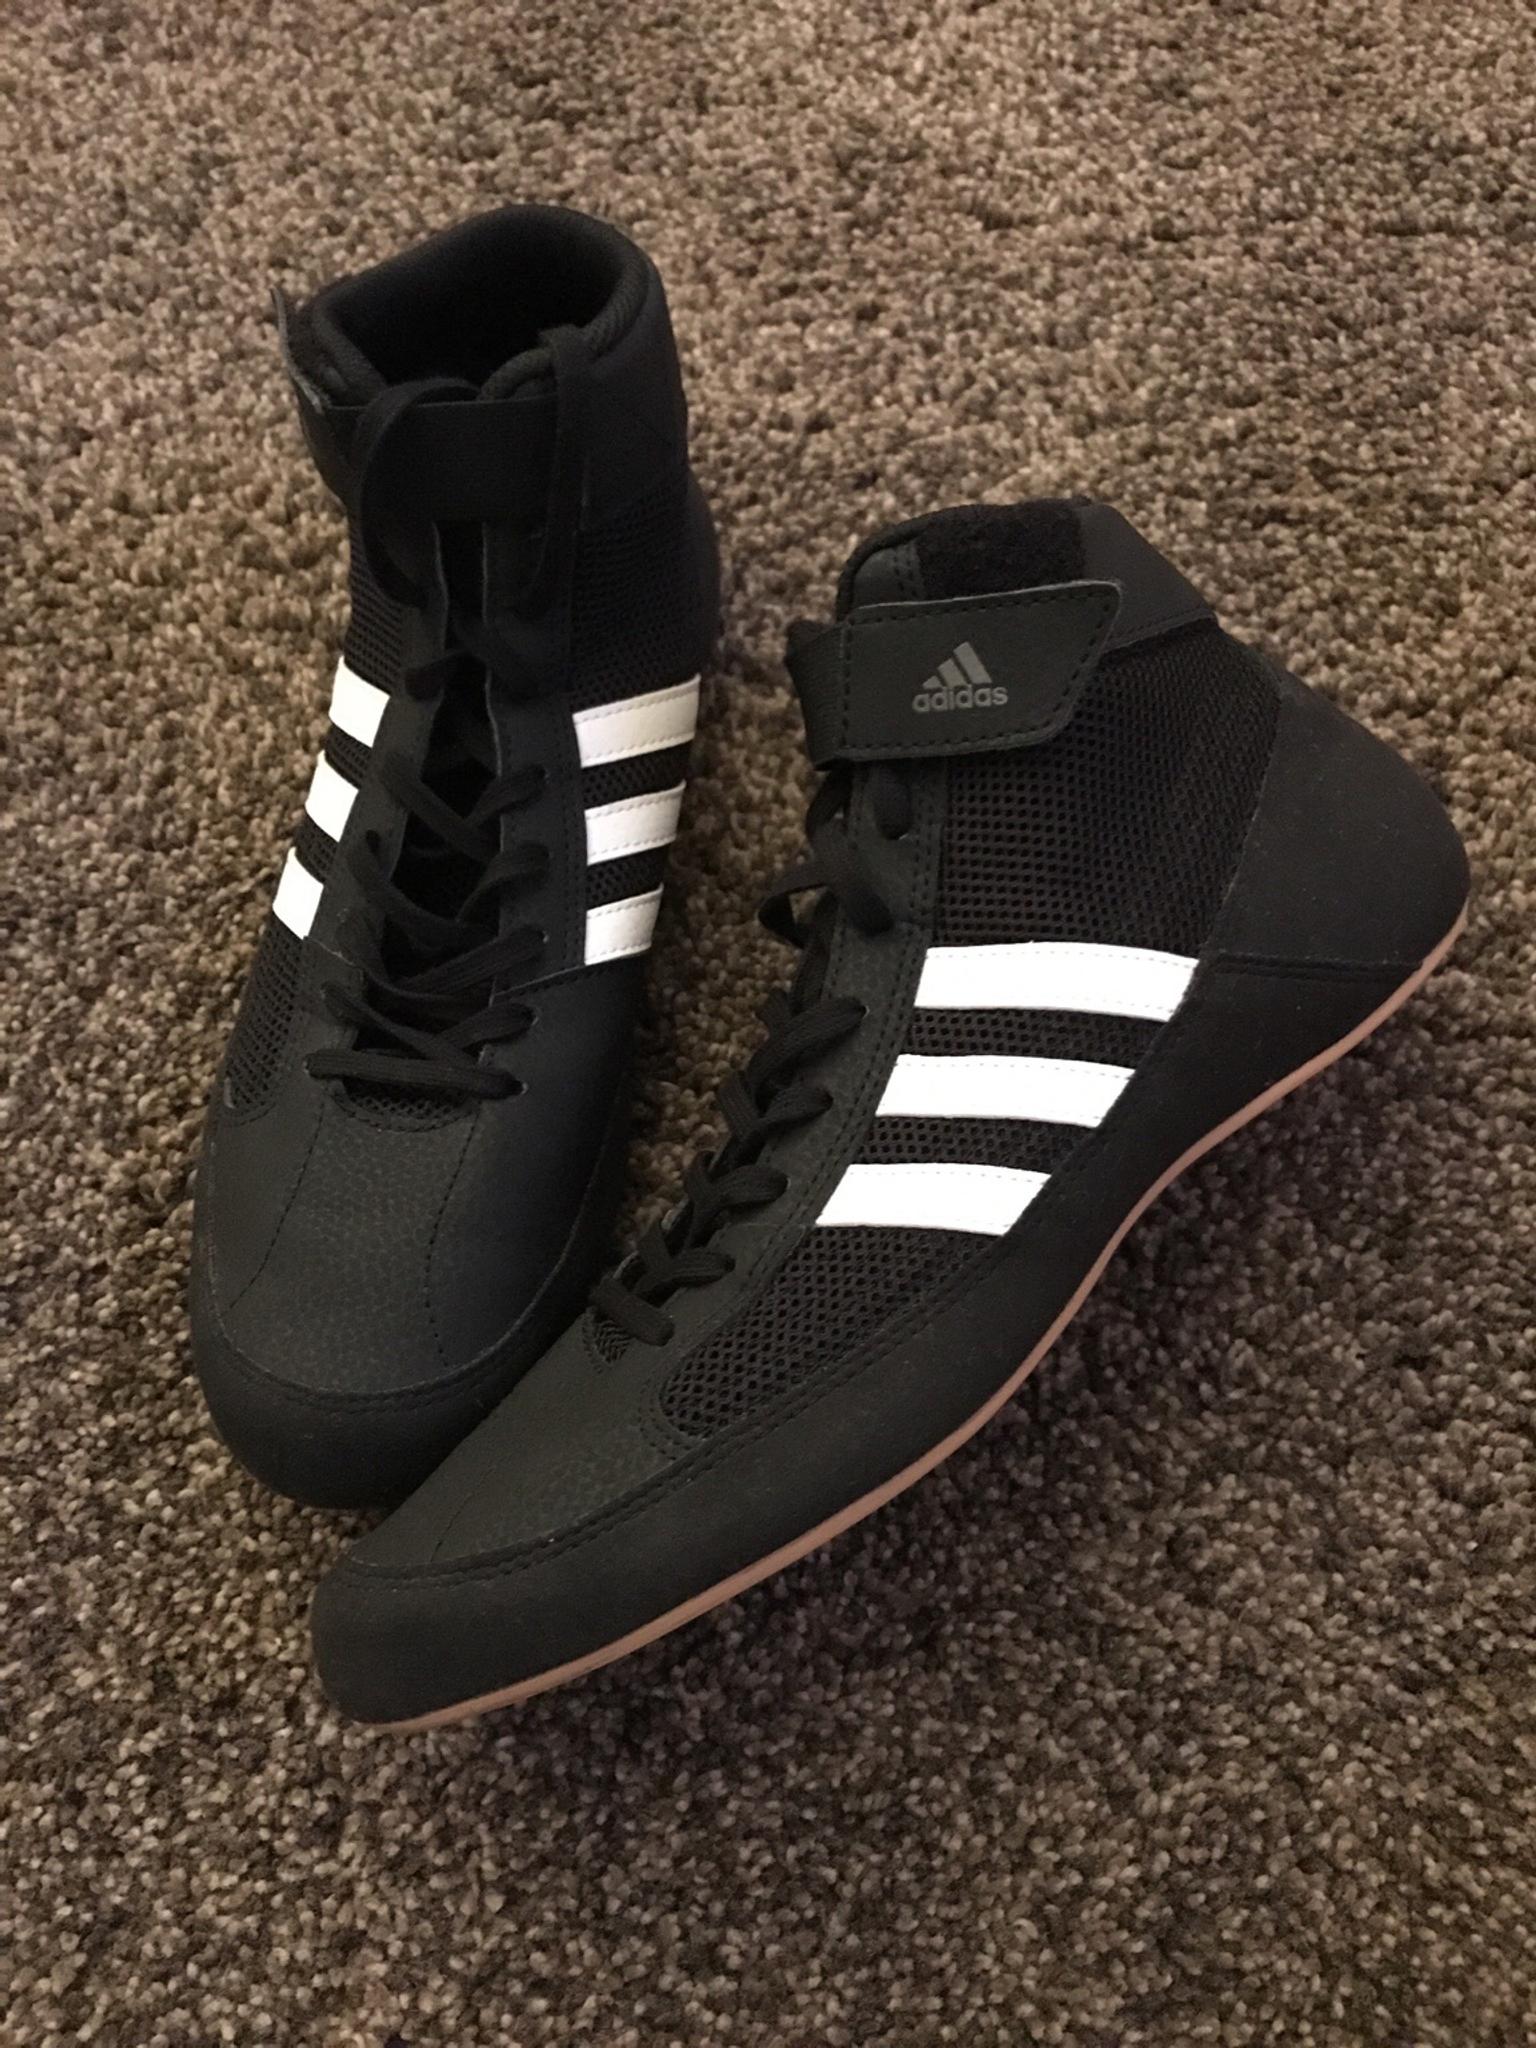 MENS ADIDAS HAVOC BOXING BOOTS in Castle Point for £10.00 for sale | Shpock